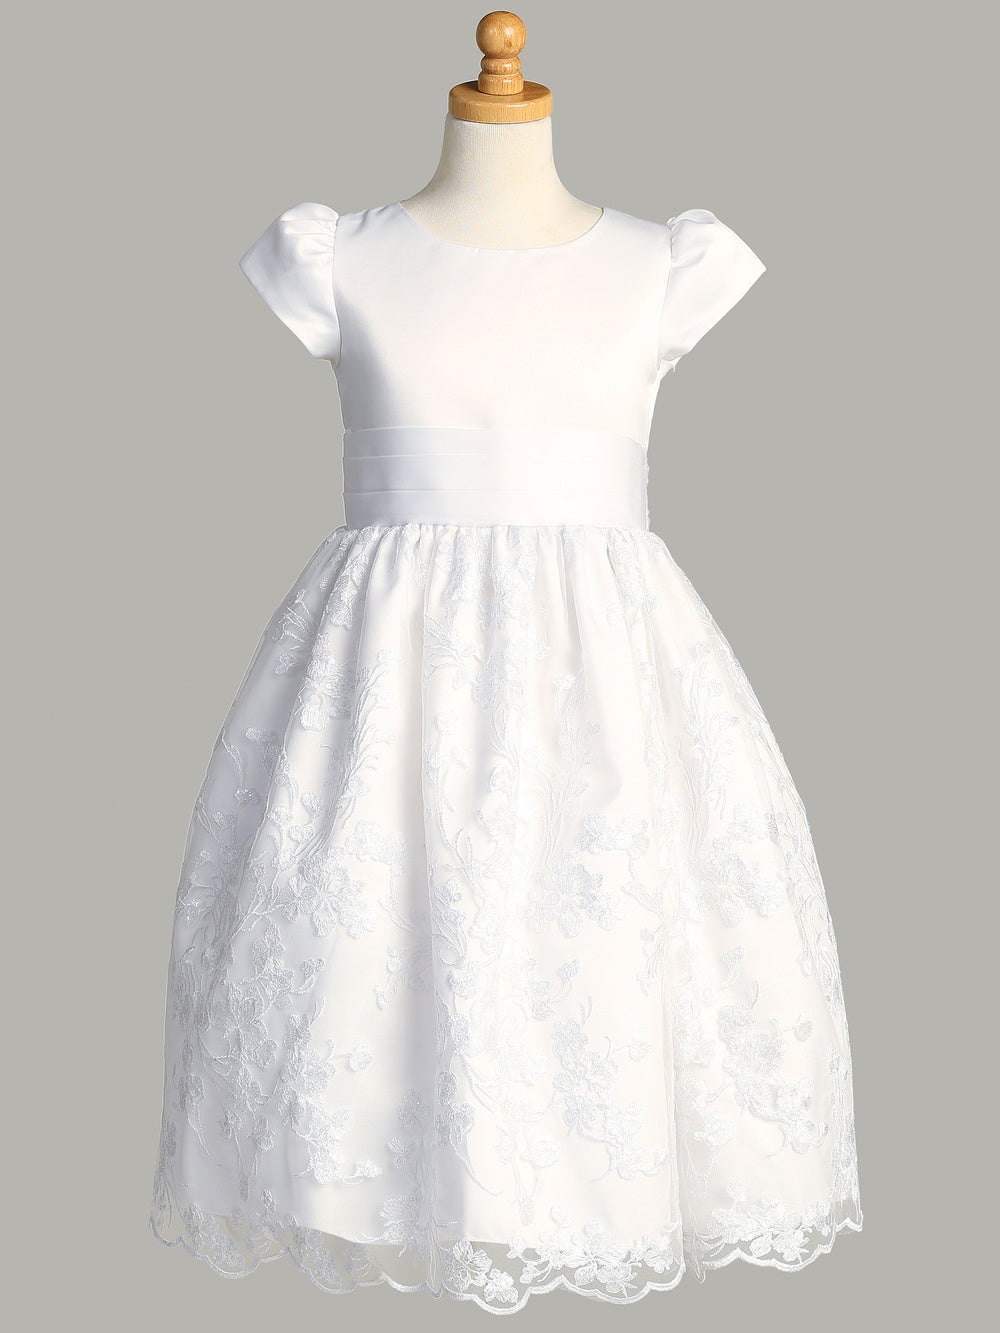 A side view of the First Communion Dress showing the satin bow on the waistline and the tea-length of the dress.